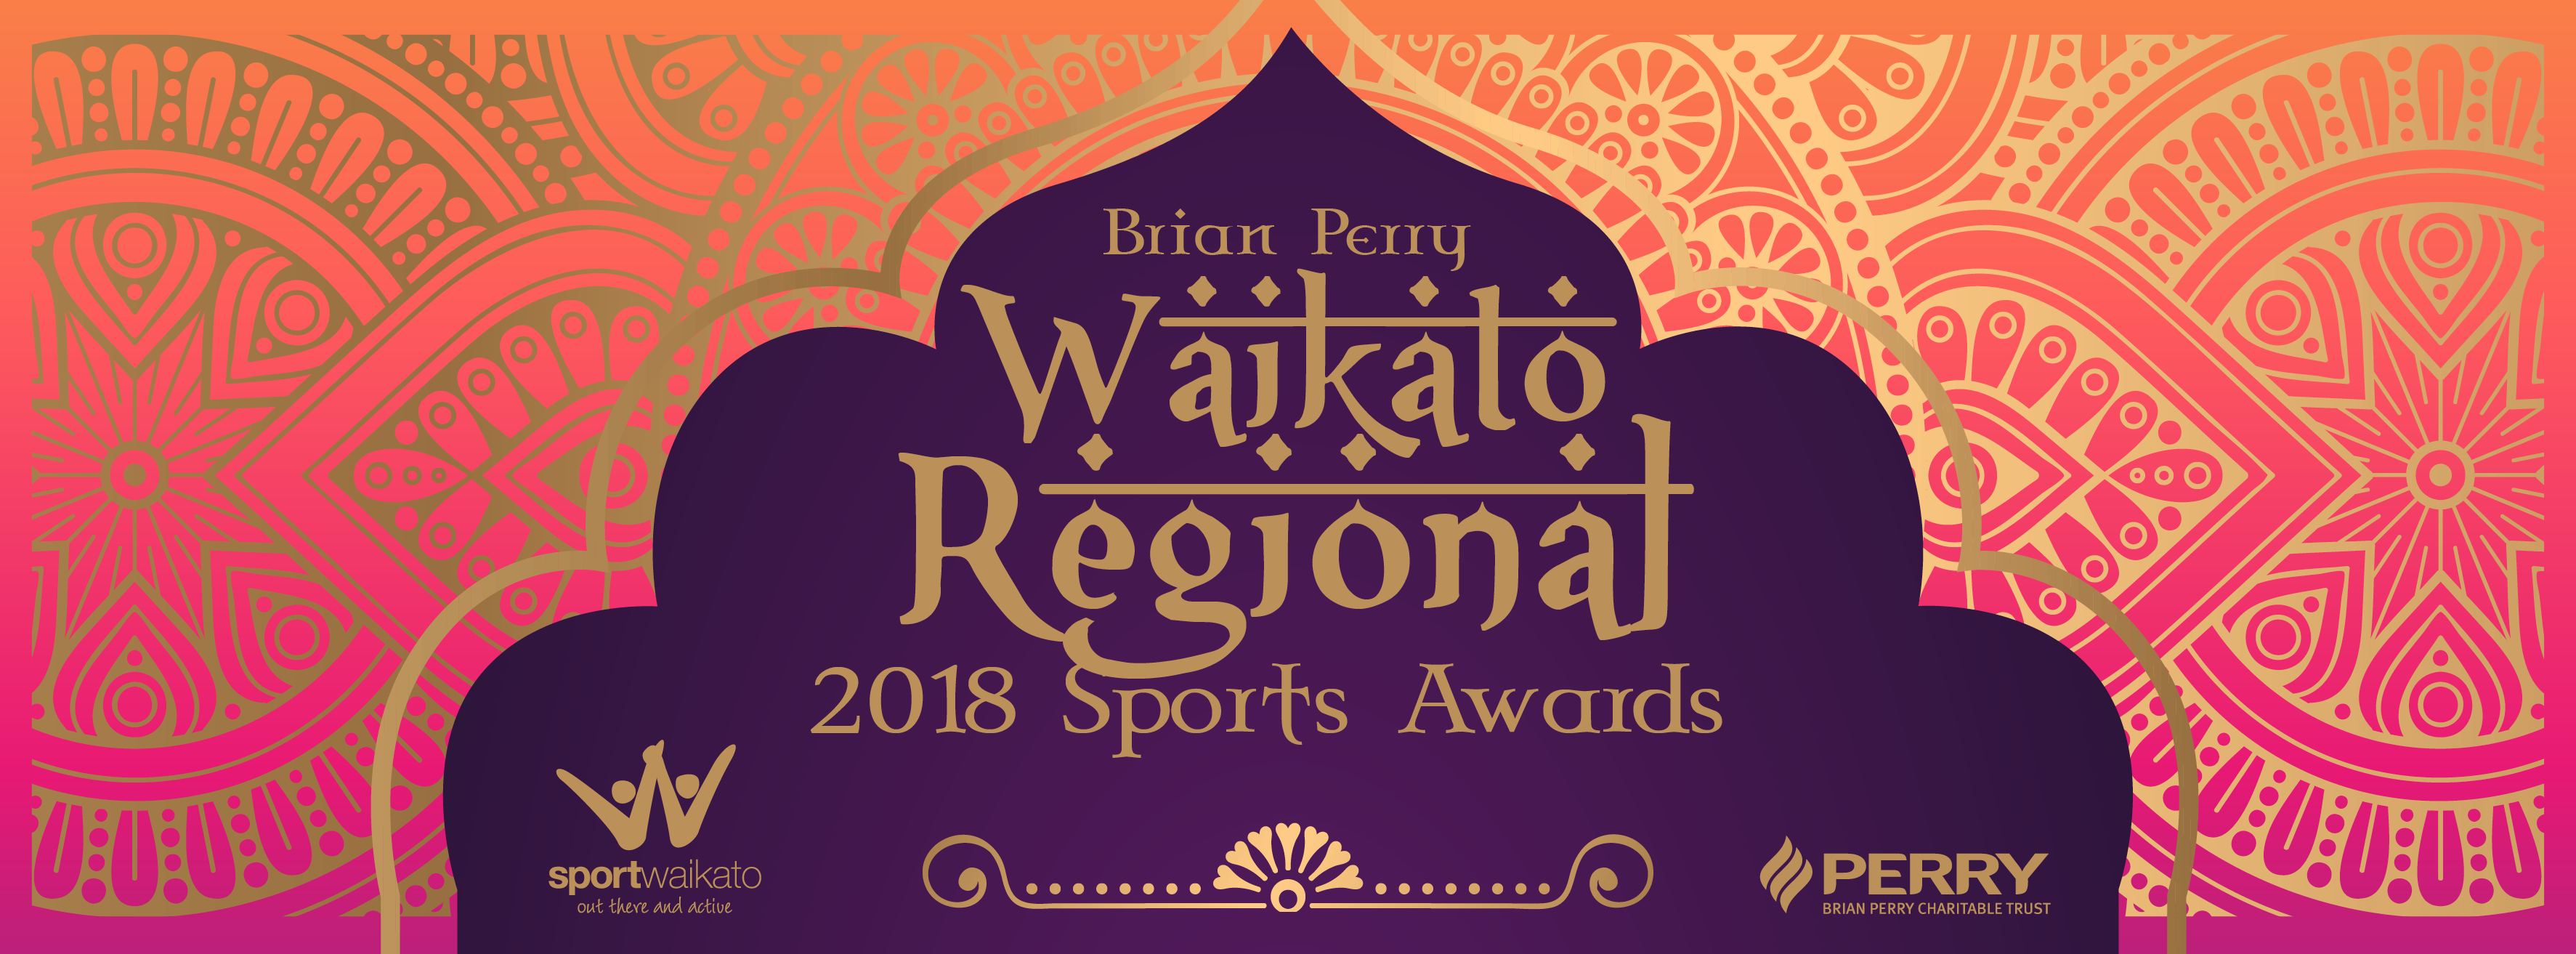 Finalists announced for the 2018 Brian Perry Waikato Regional Sports Awards!